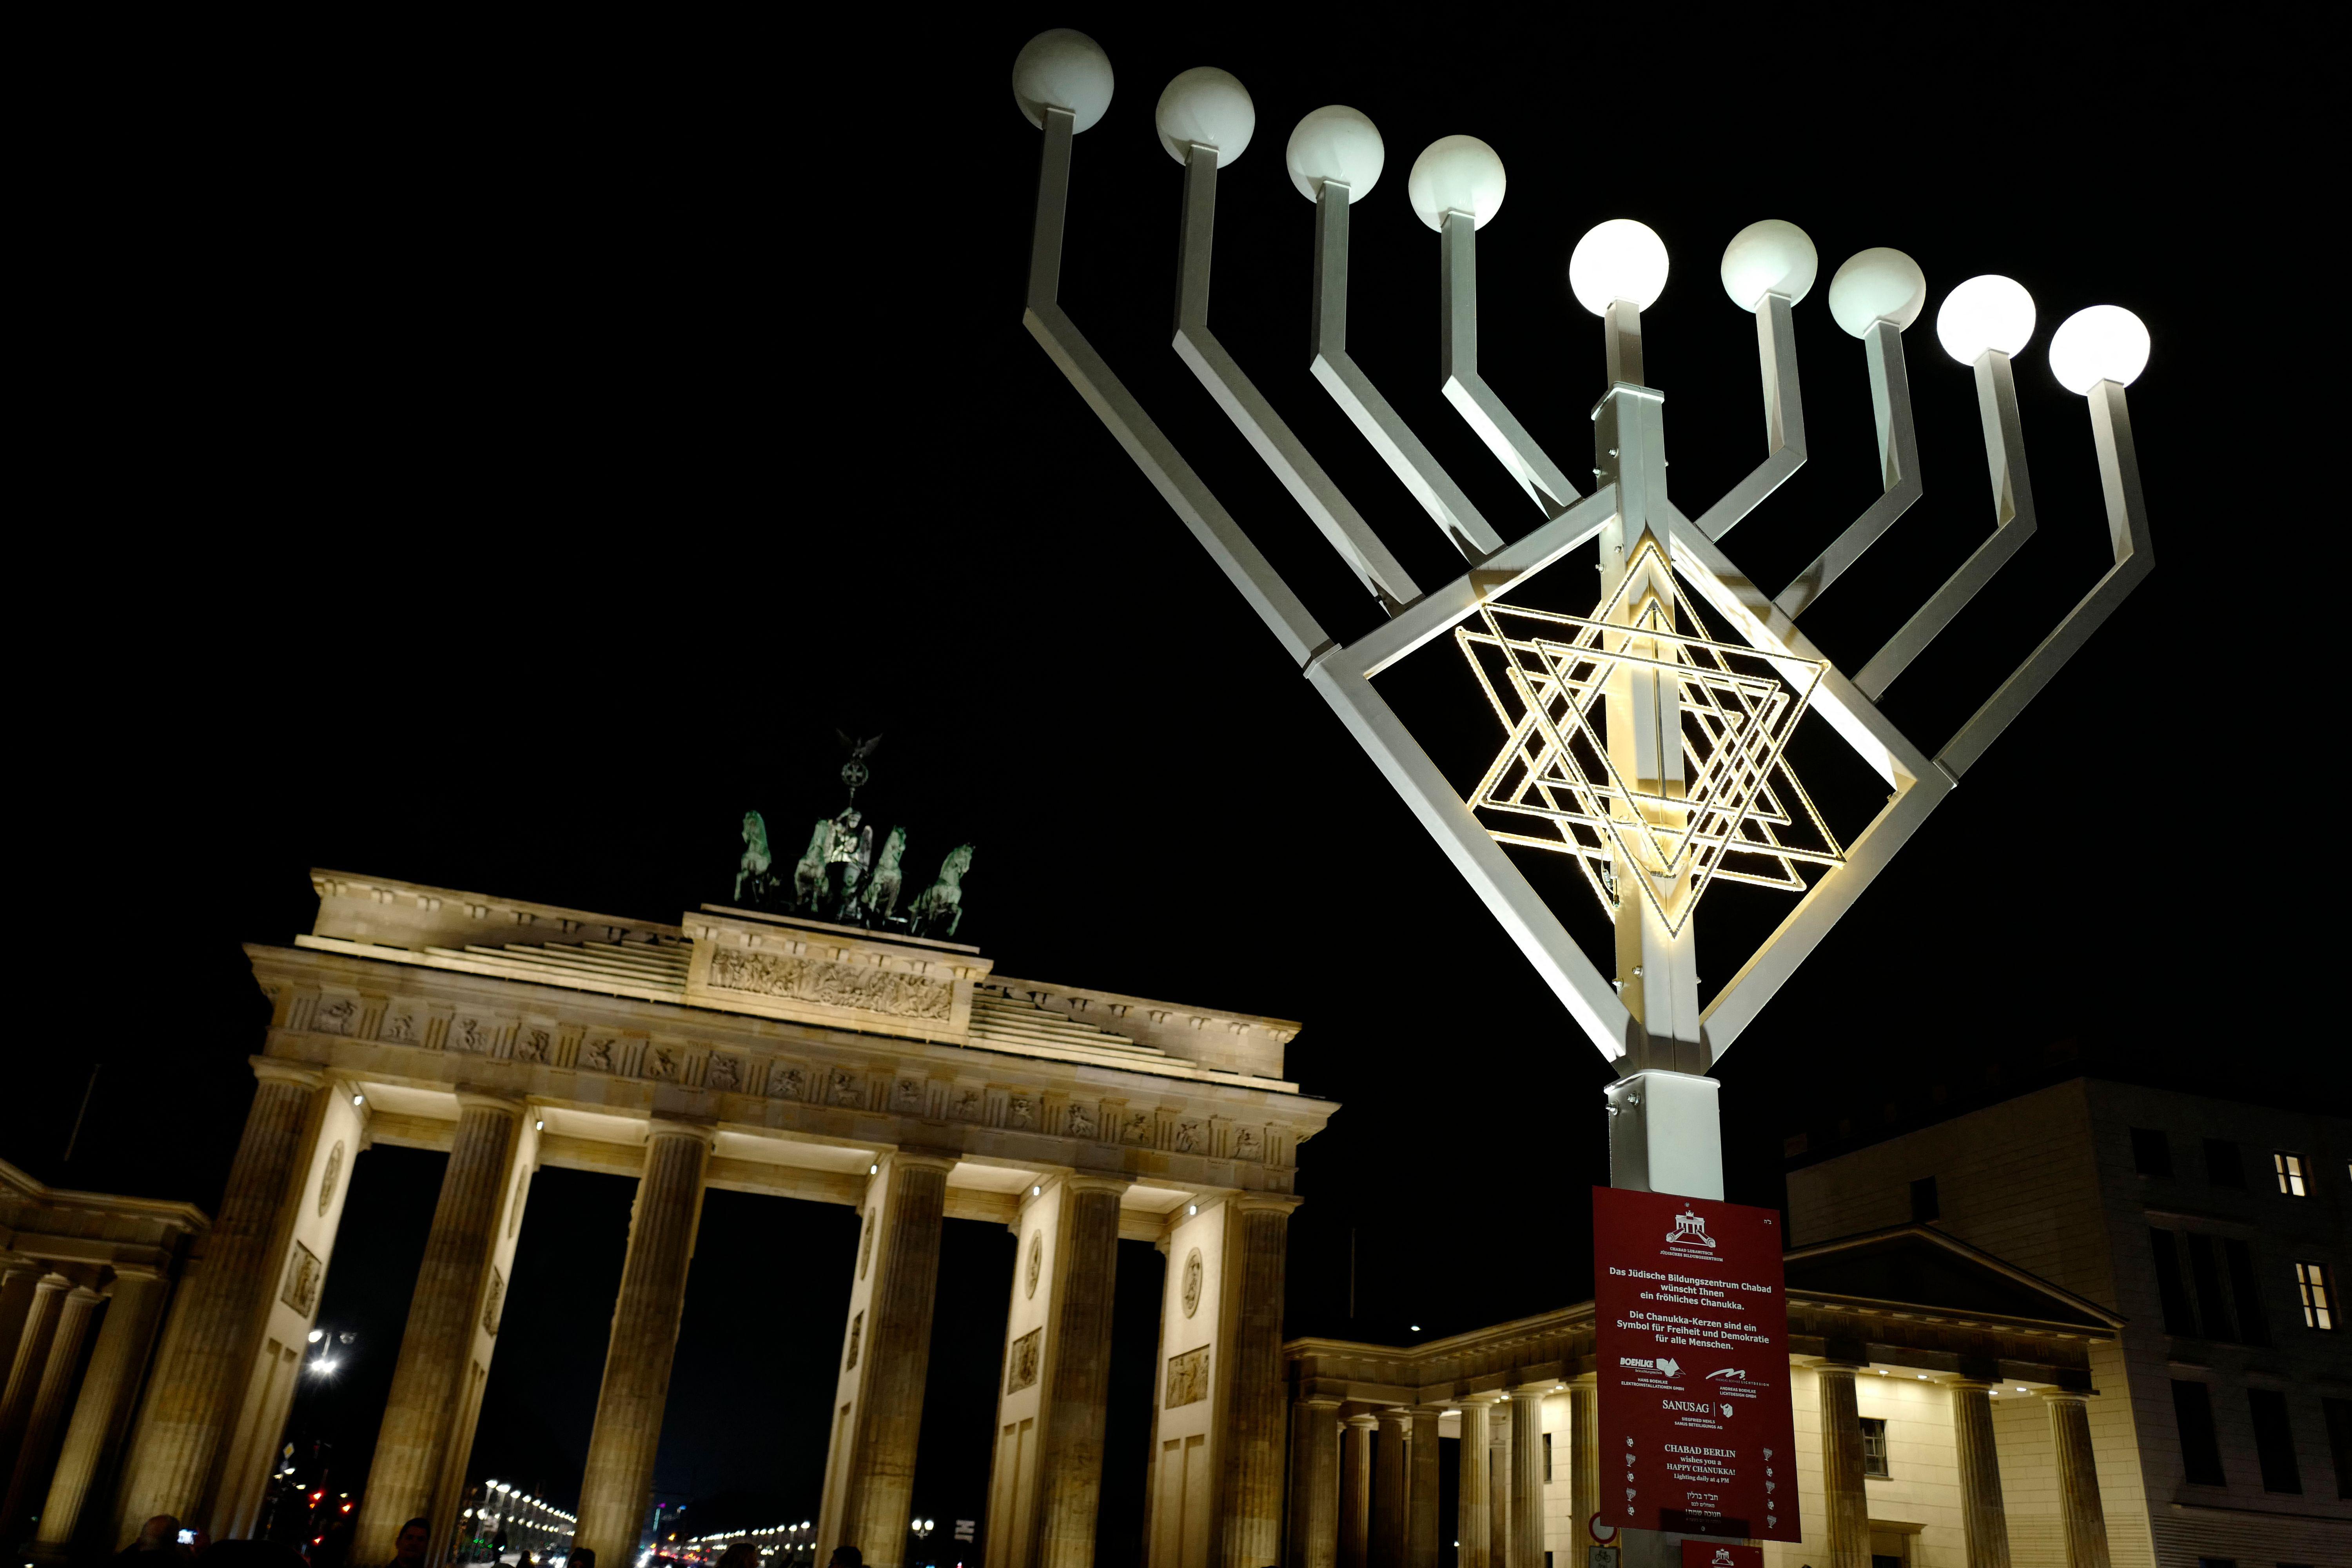 A large menorah in front of the Brandenburg Gate at nighttime.